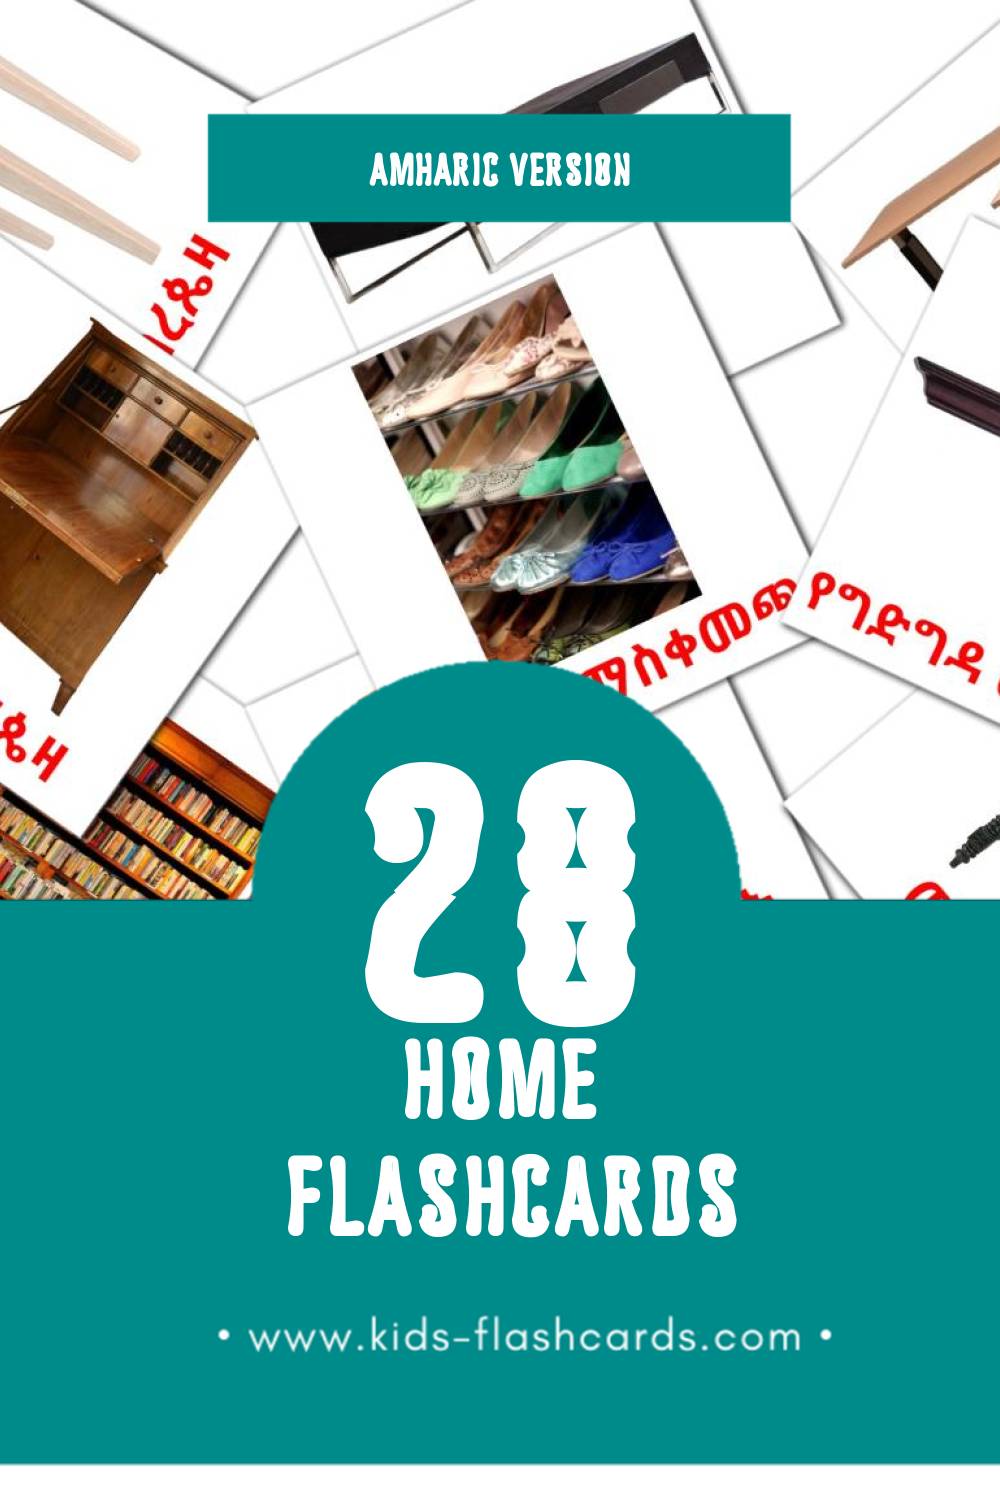 Visual ቤት Flashcards for Toddlers (56 cards in Amharic)